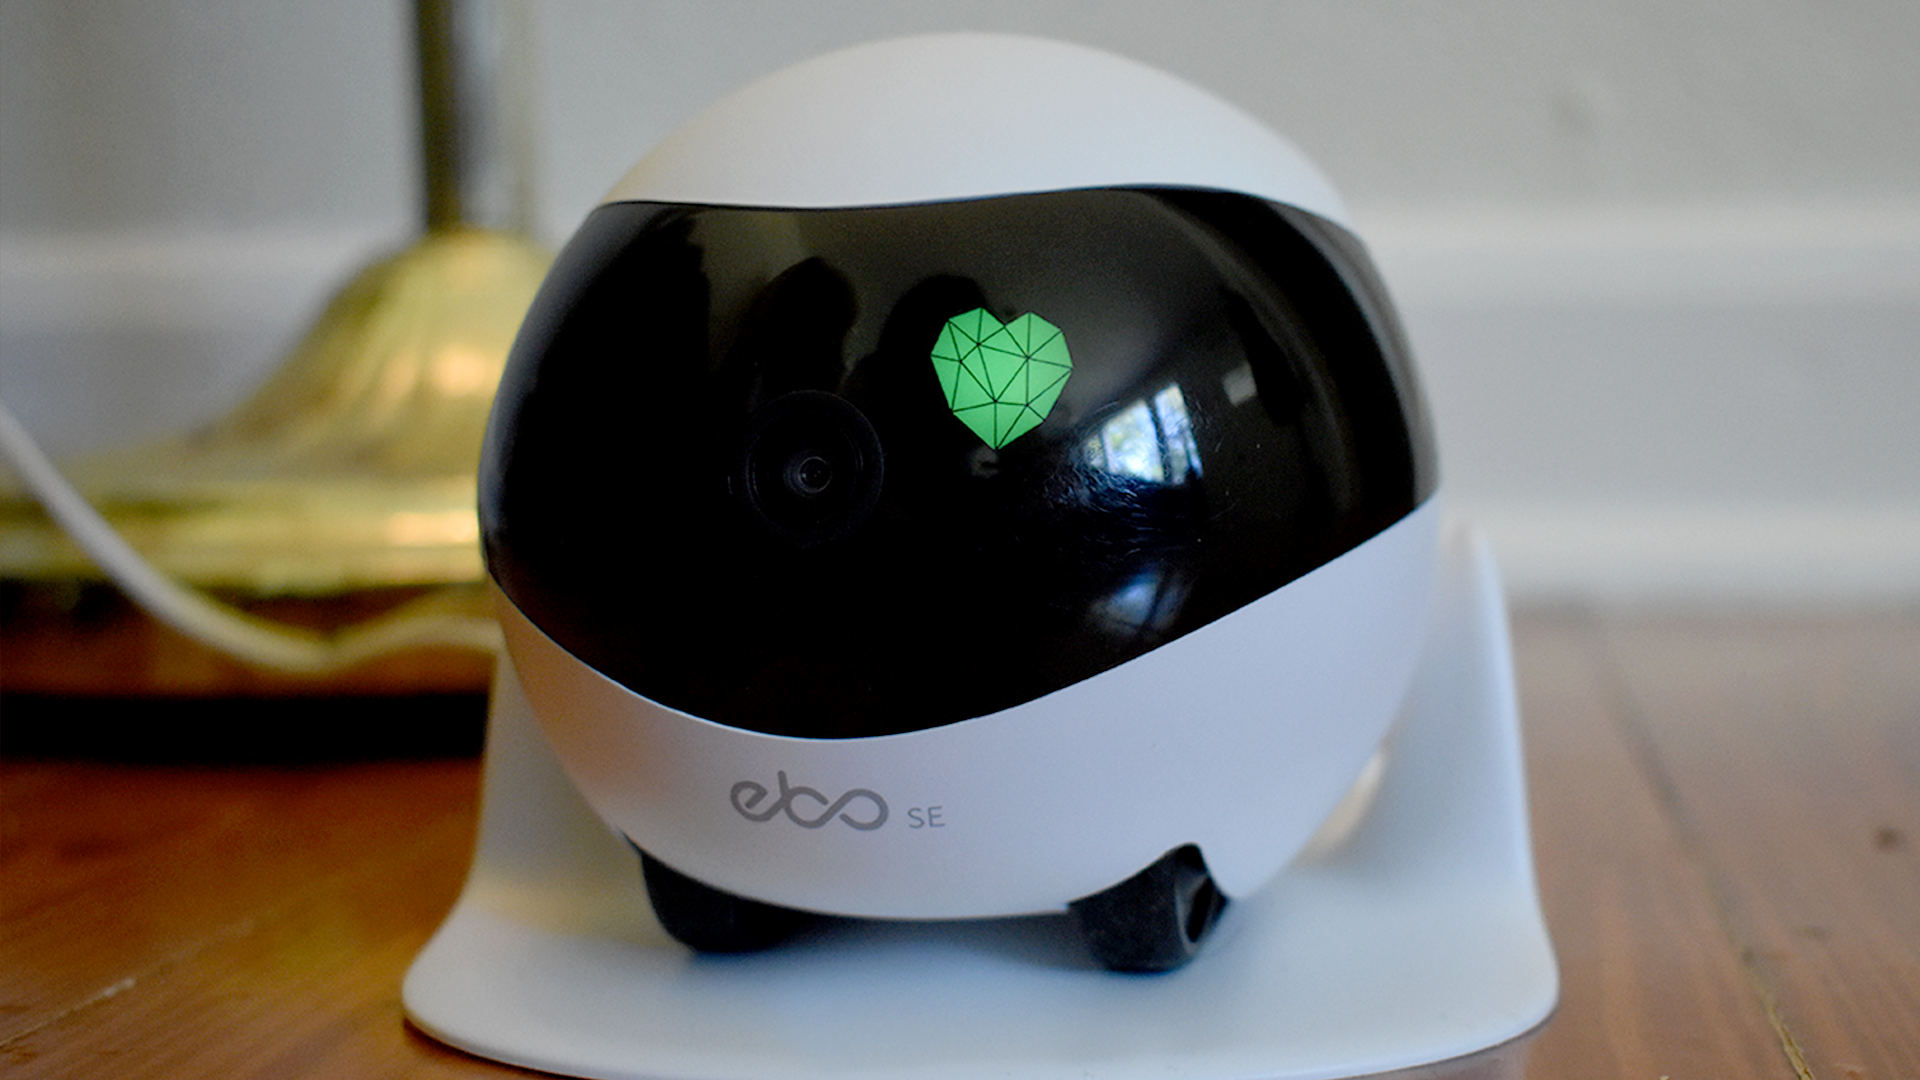 Ebo SE Review: A Cute, Fun, and Misguided Toy for Cat Owners